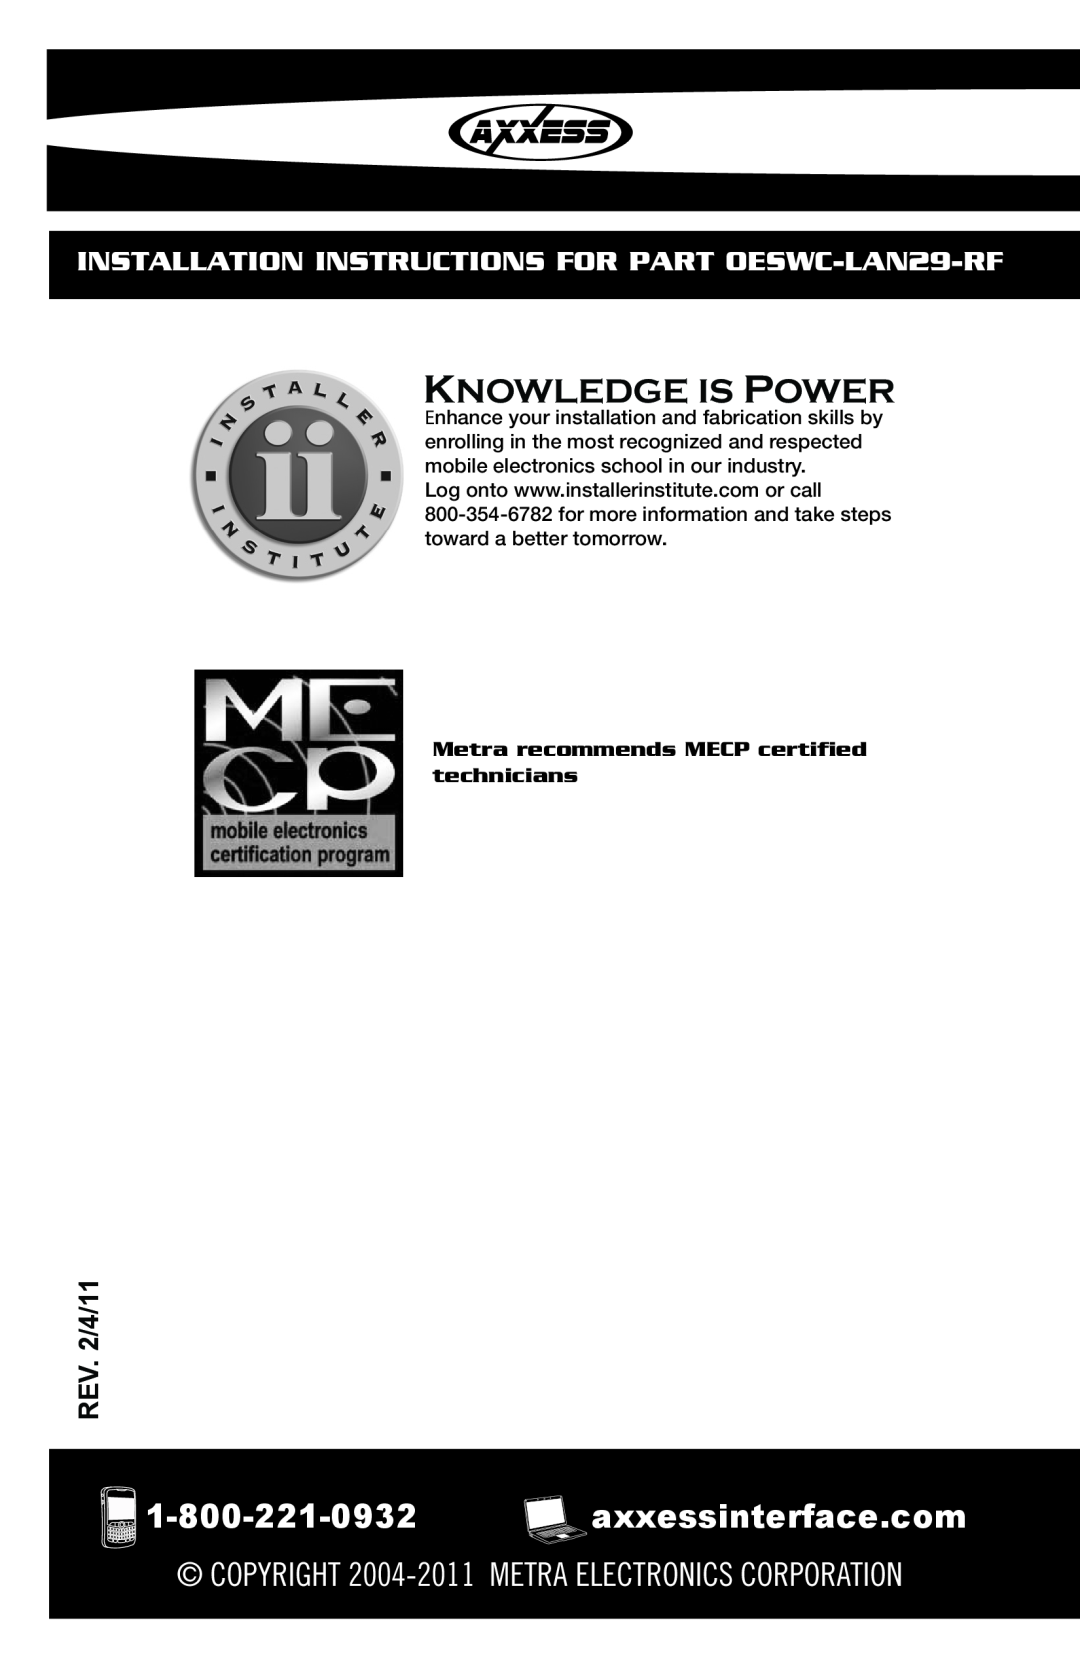 Axxess Interface Knowledge Is Power, INSTALLATION INSTRUCTIONS FOR PART OESWC-LAN29-RF, REV. 2/4/11 